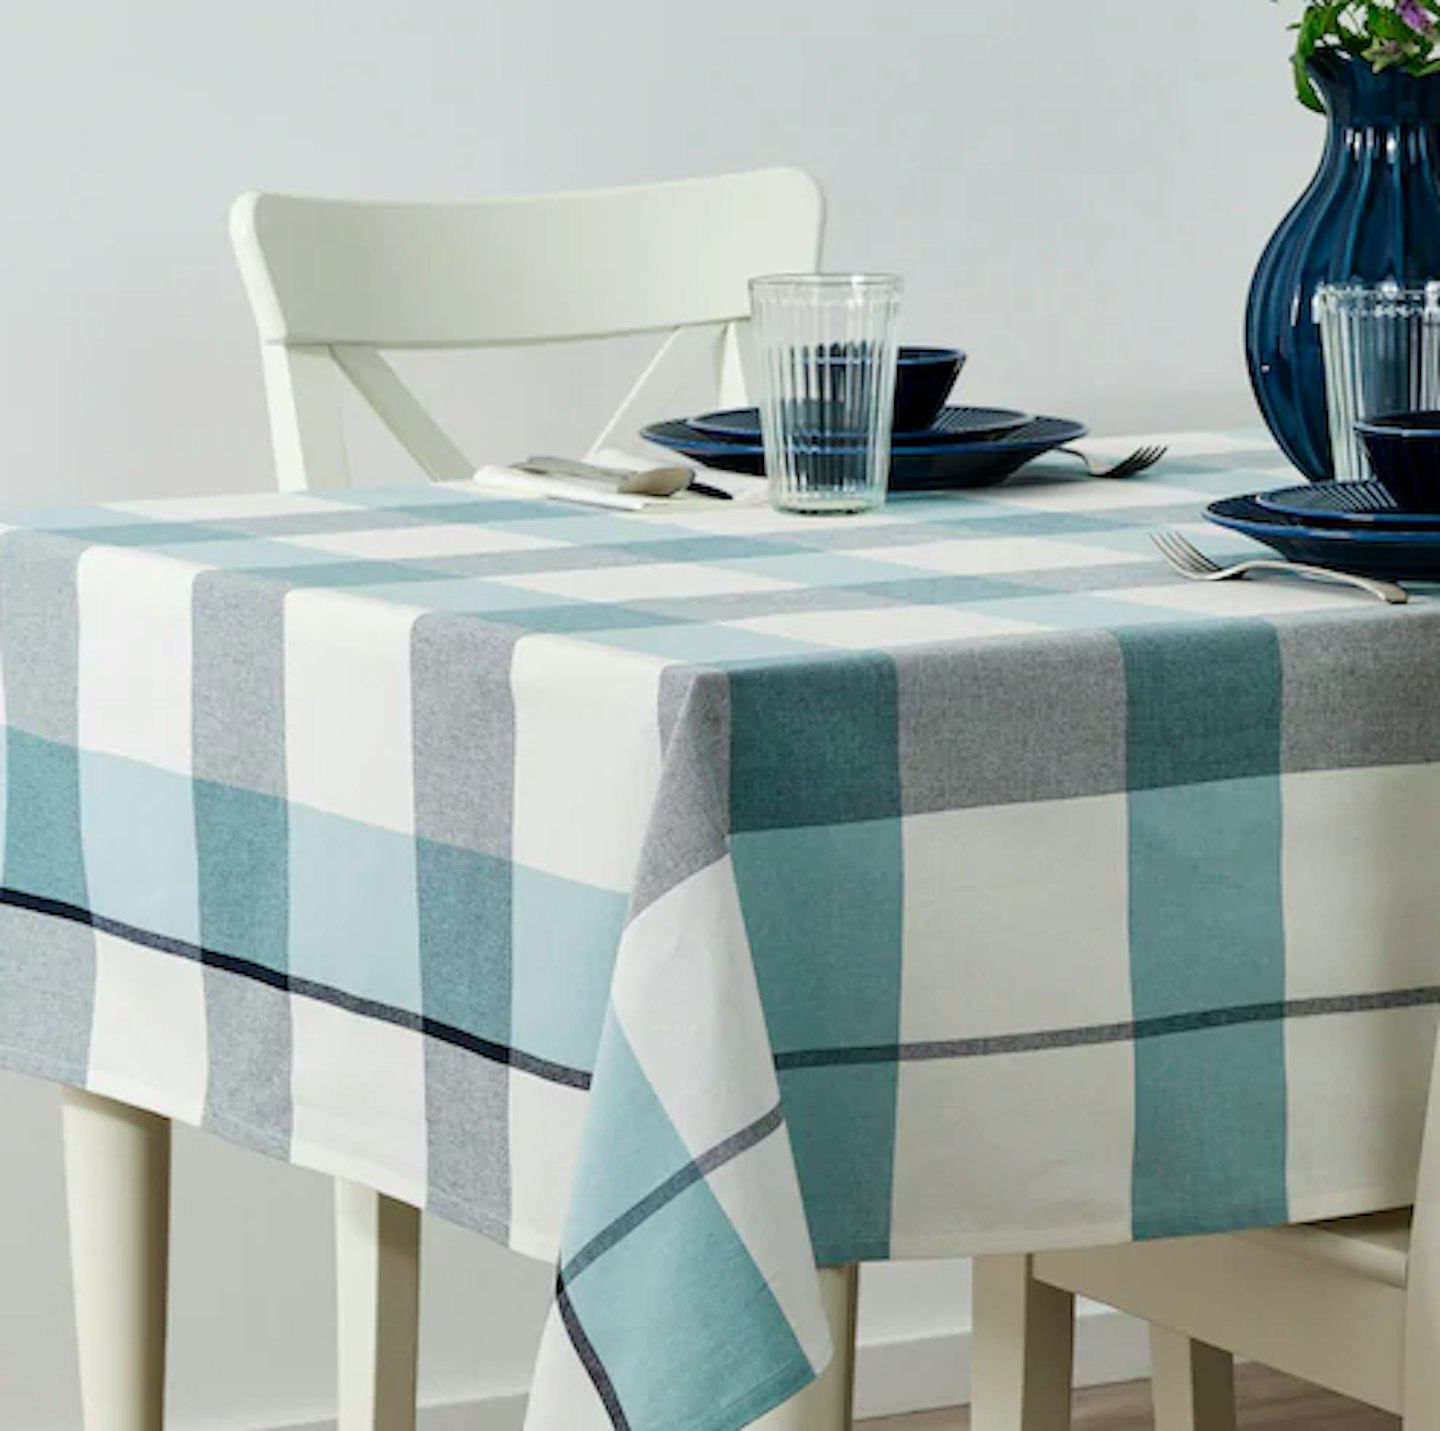 Ikea, Checked Tablecloth, £12